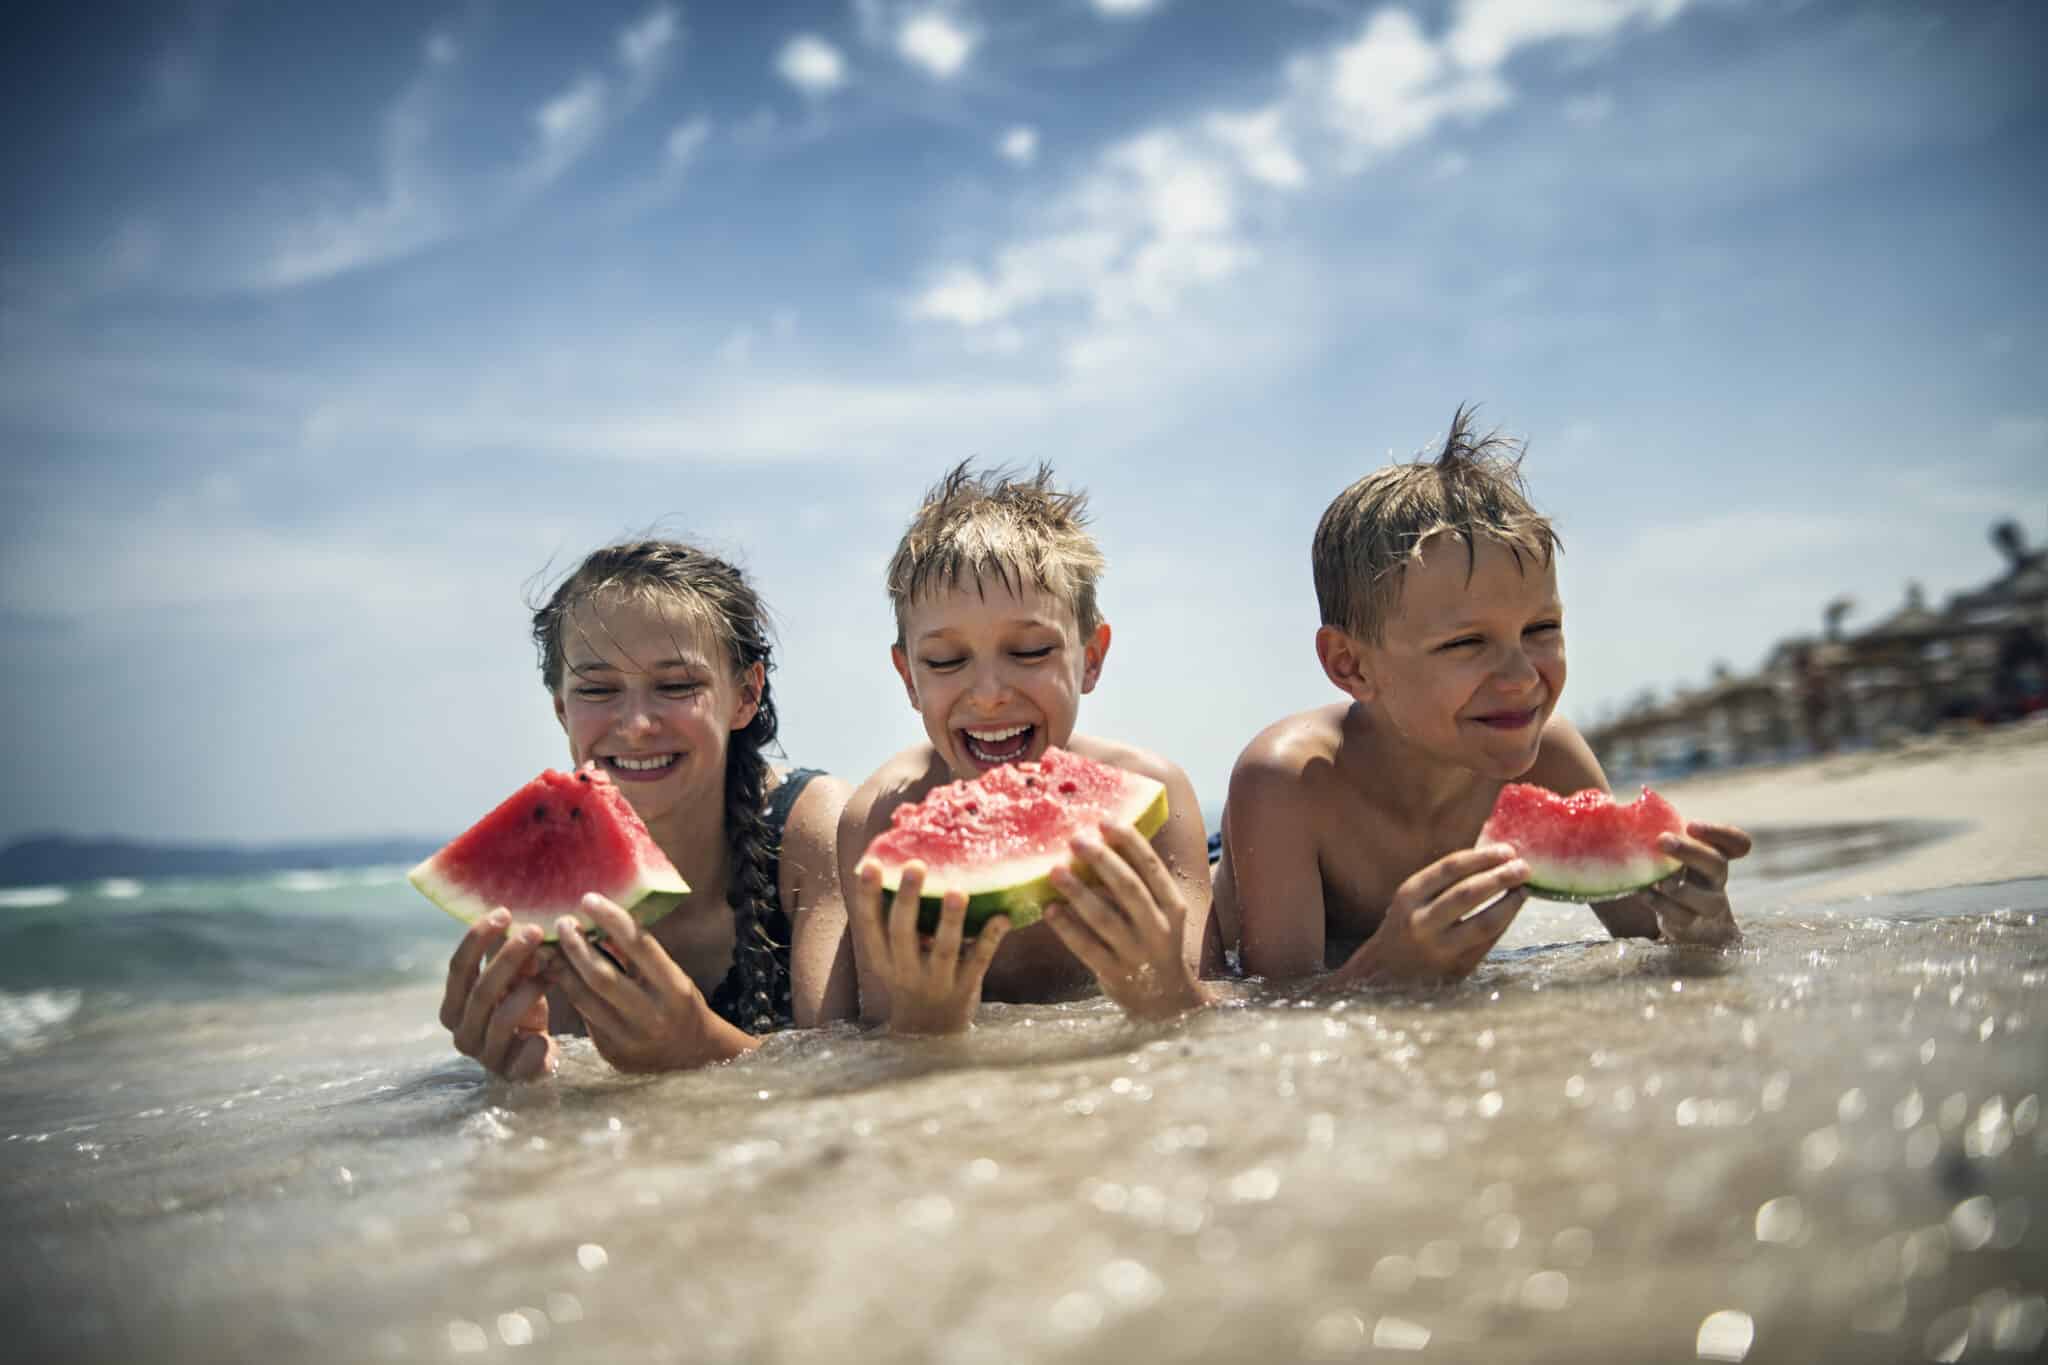 Happy kids eating watermelon on the beach